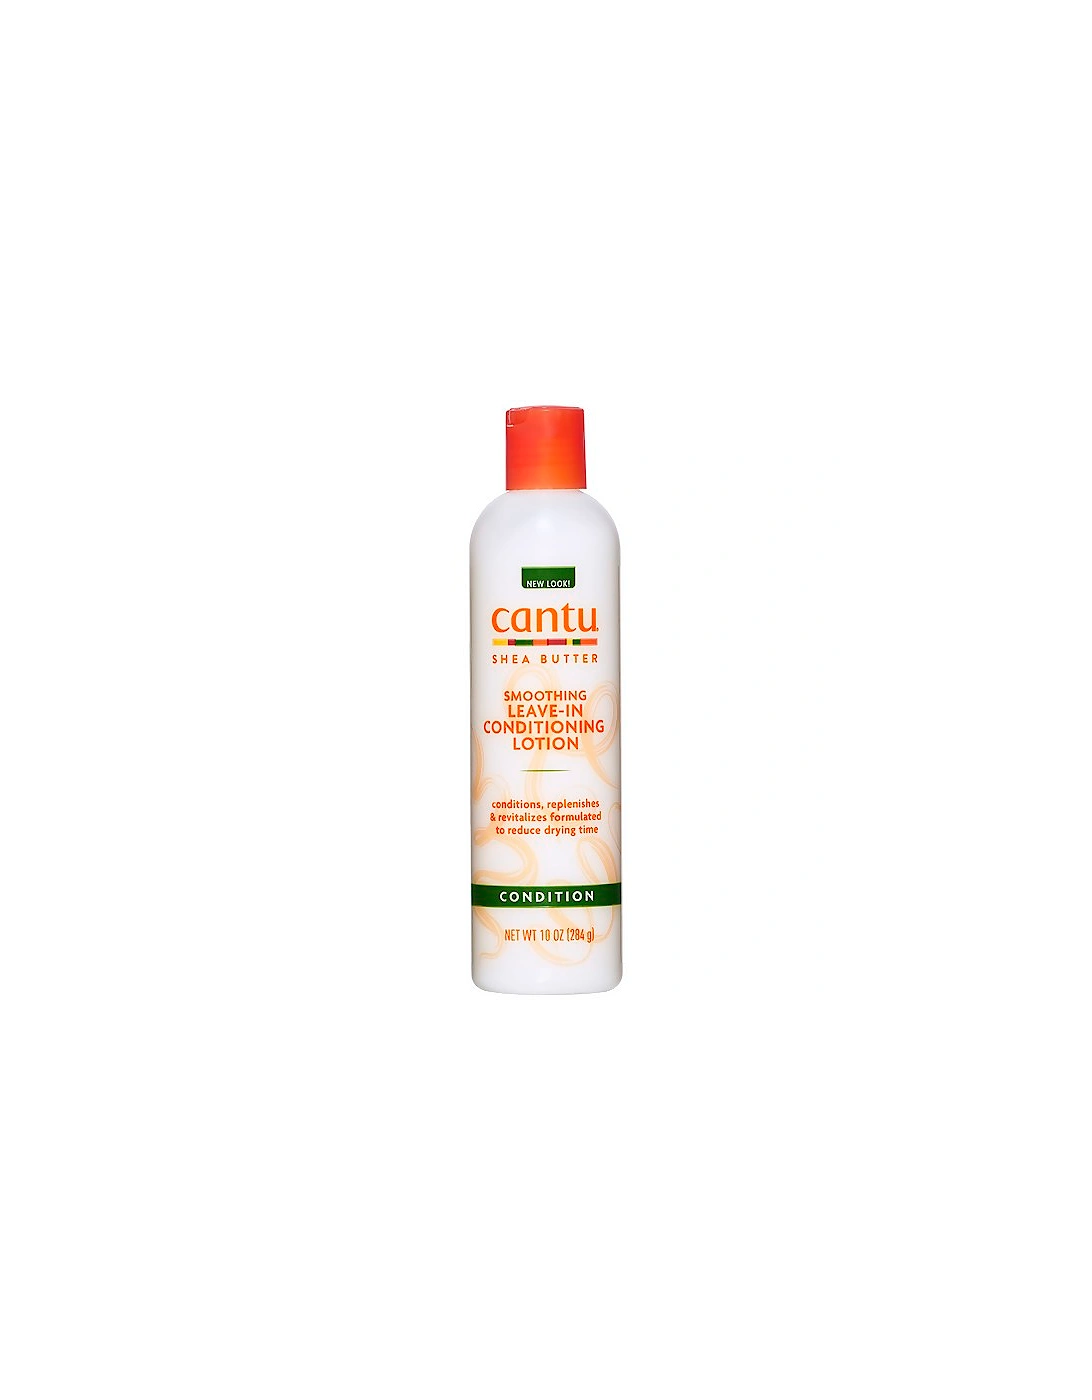 Shea Butter Smoothing Leave-In Conditioning Lotion, 2 of 1